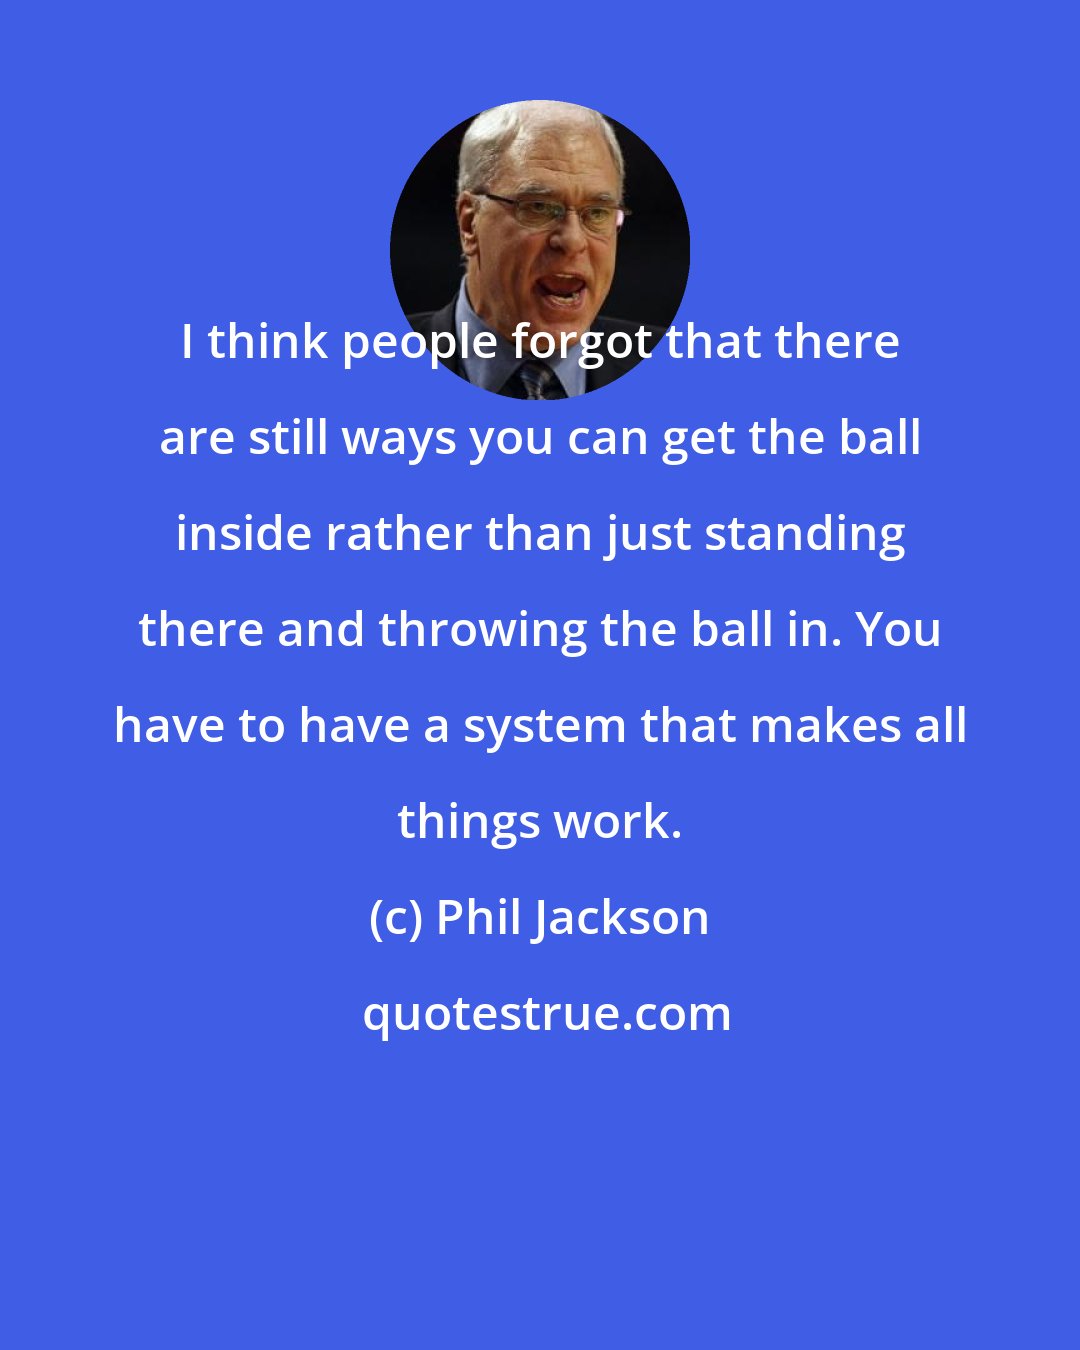 Phil Jackson: I think people forgot that there are still ways you can get the ball inside rather than just standing there and throwing the ball in. You have to have a system that makes all things work.